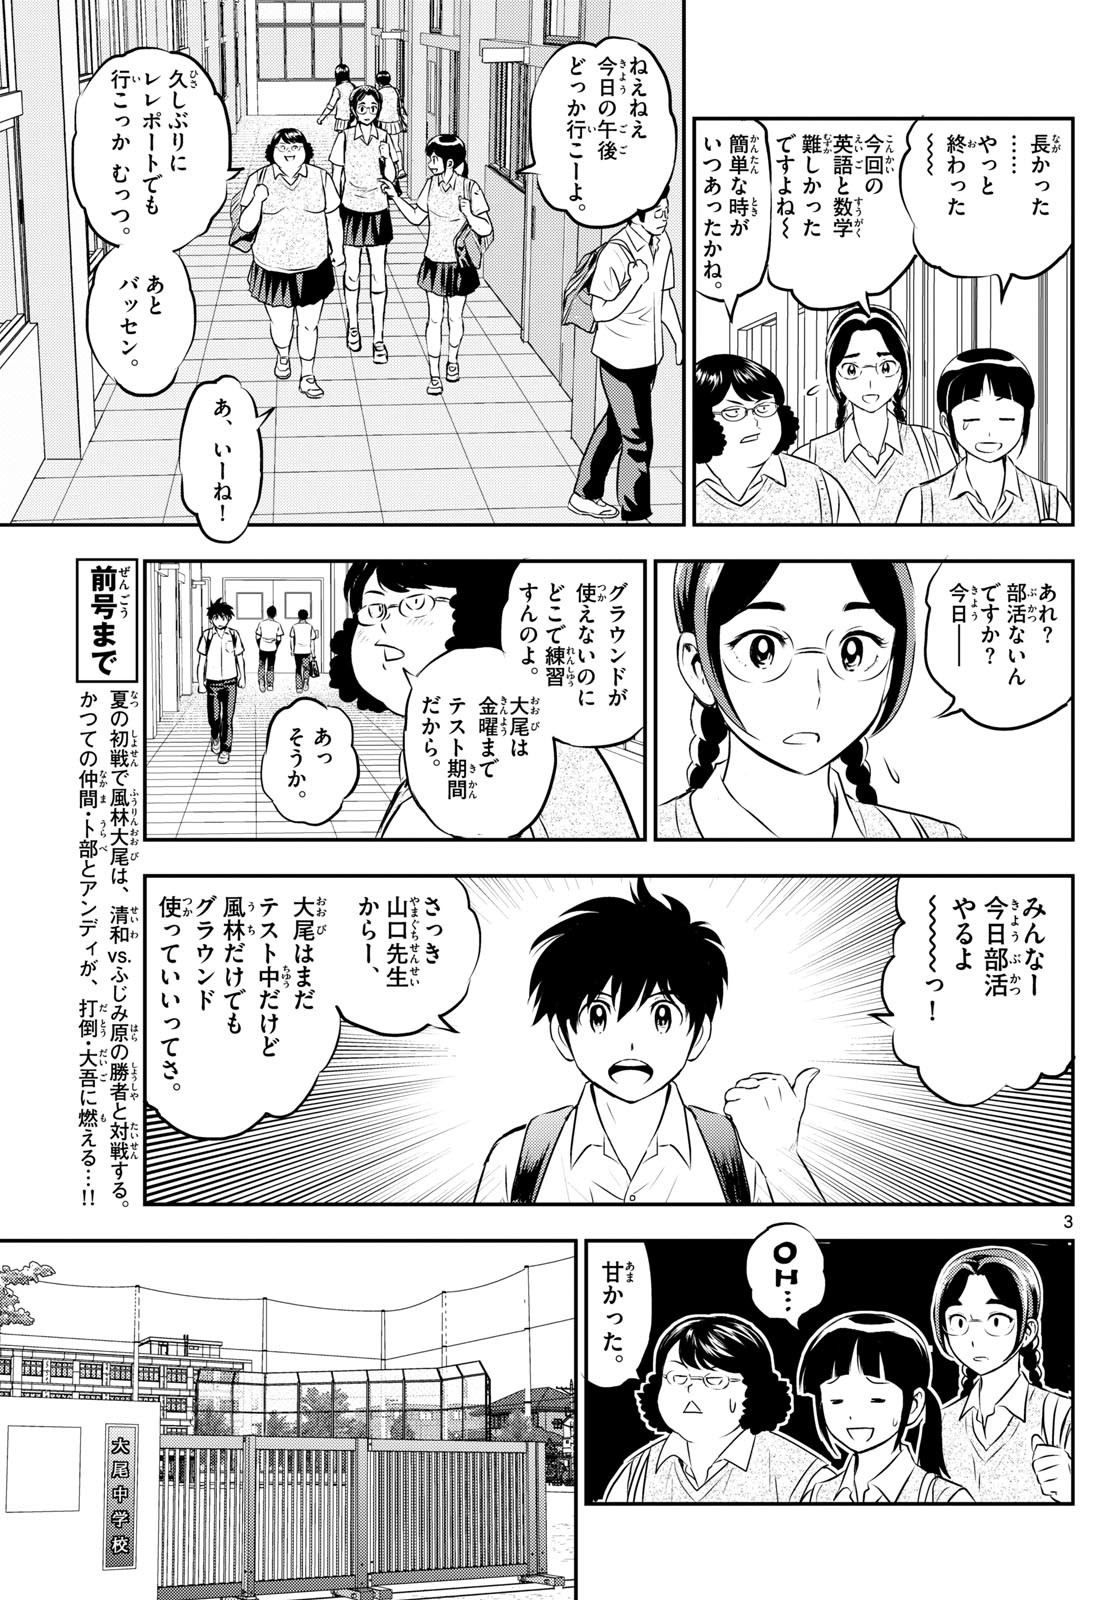 Major 2nd - メジャーセカンド - Chapter 261 - Page 3